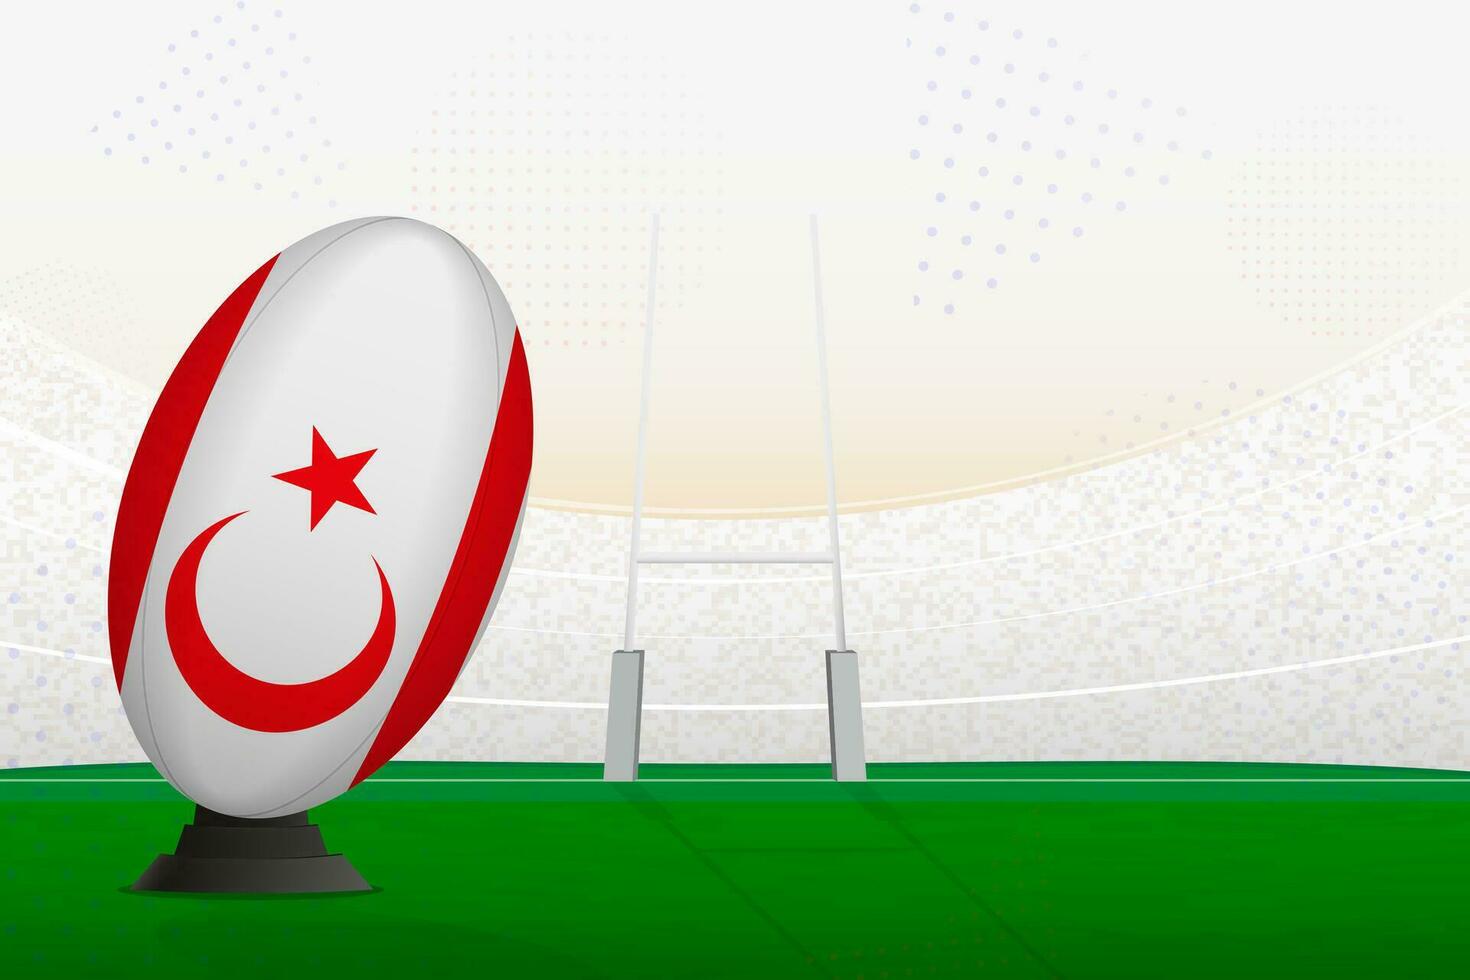 Northern Cyprus national team rugby ball on rugby stadium and goal posts, preparing for a penalty or free kick. vector